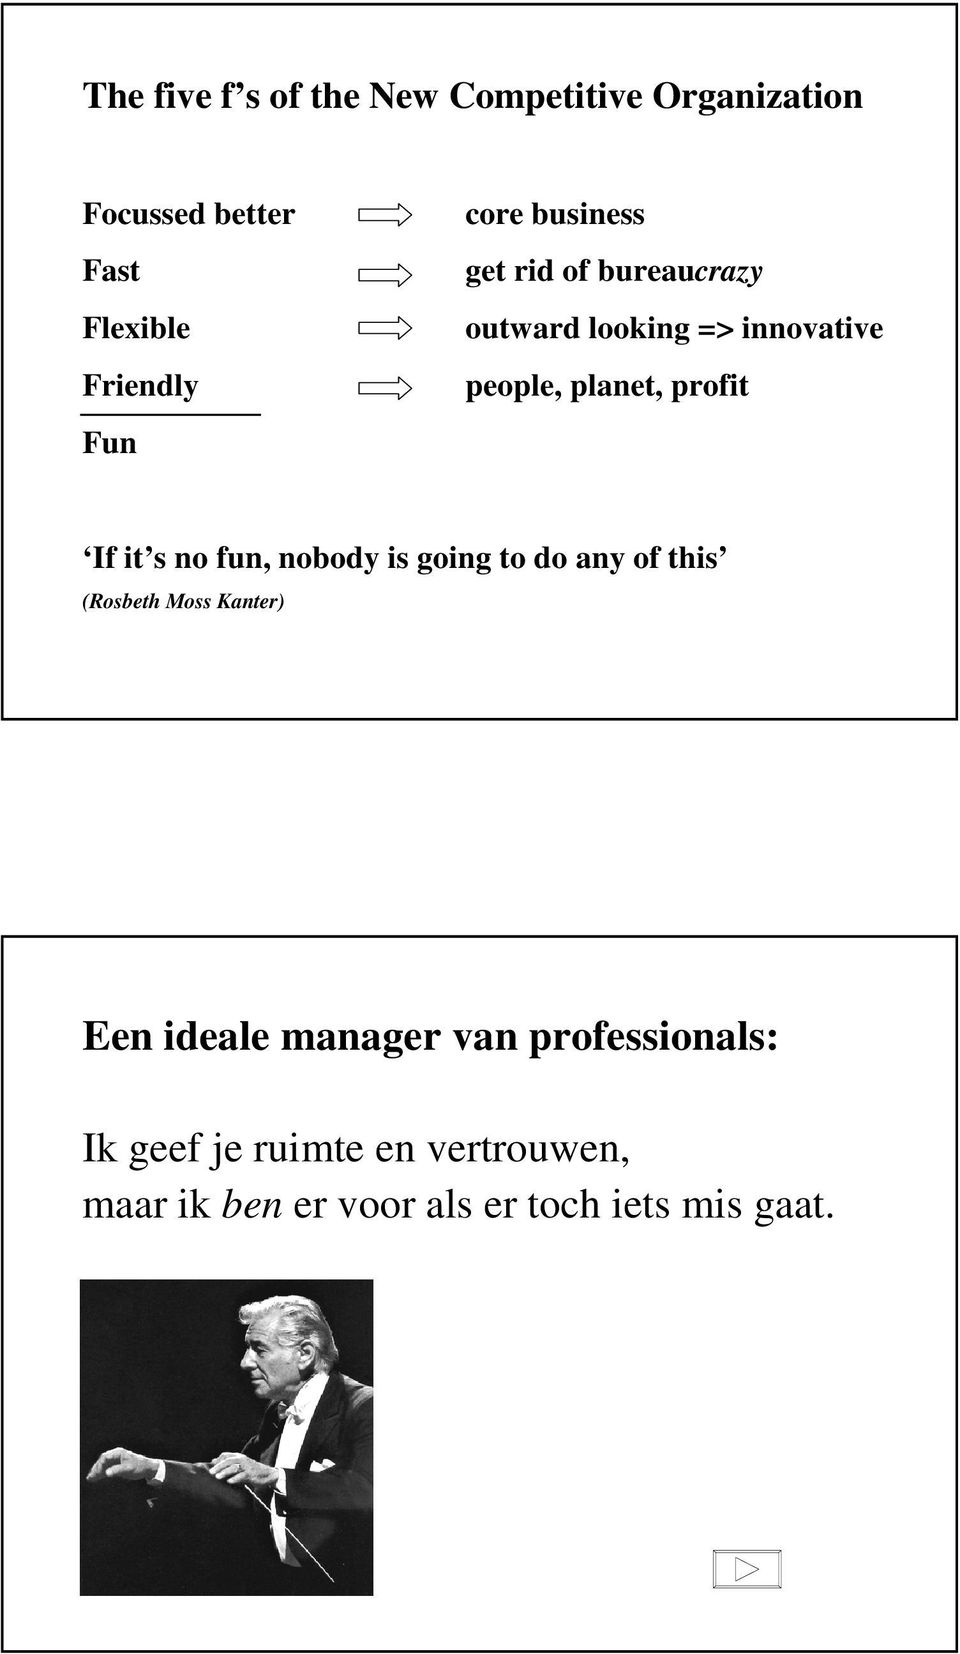 it s no fun, nobody is going to do any of this (Rosbeth Moss Kanter) Een ideale manager van